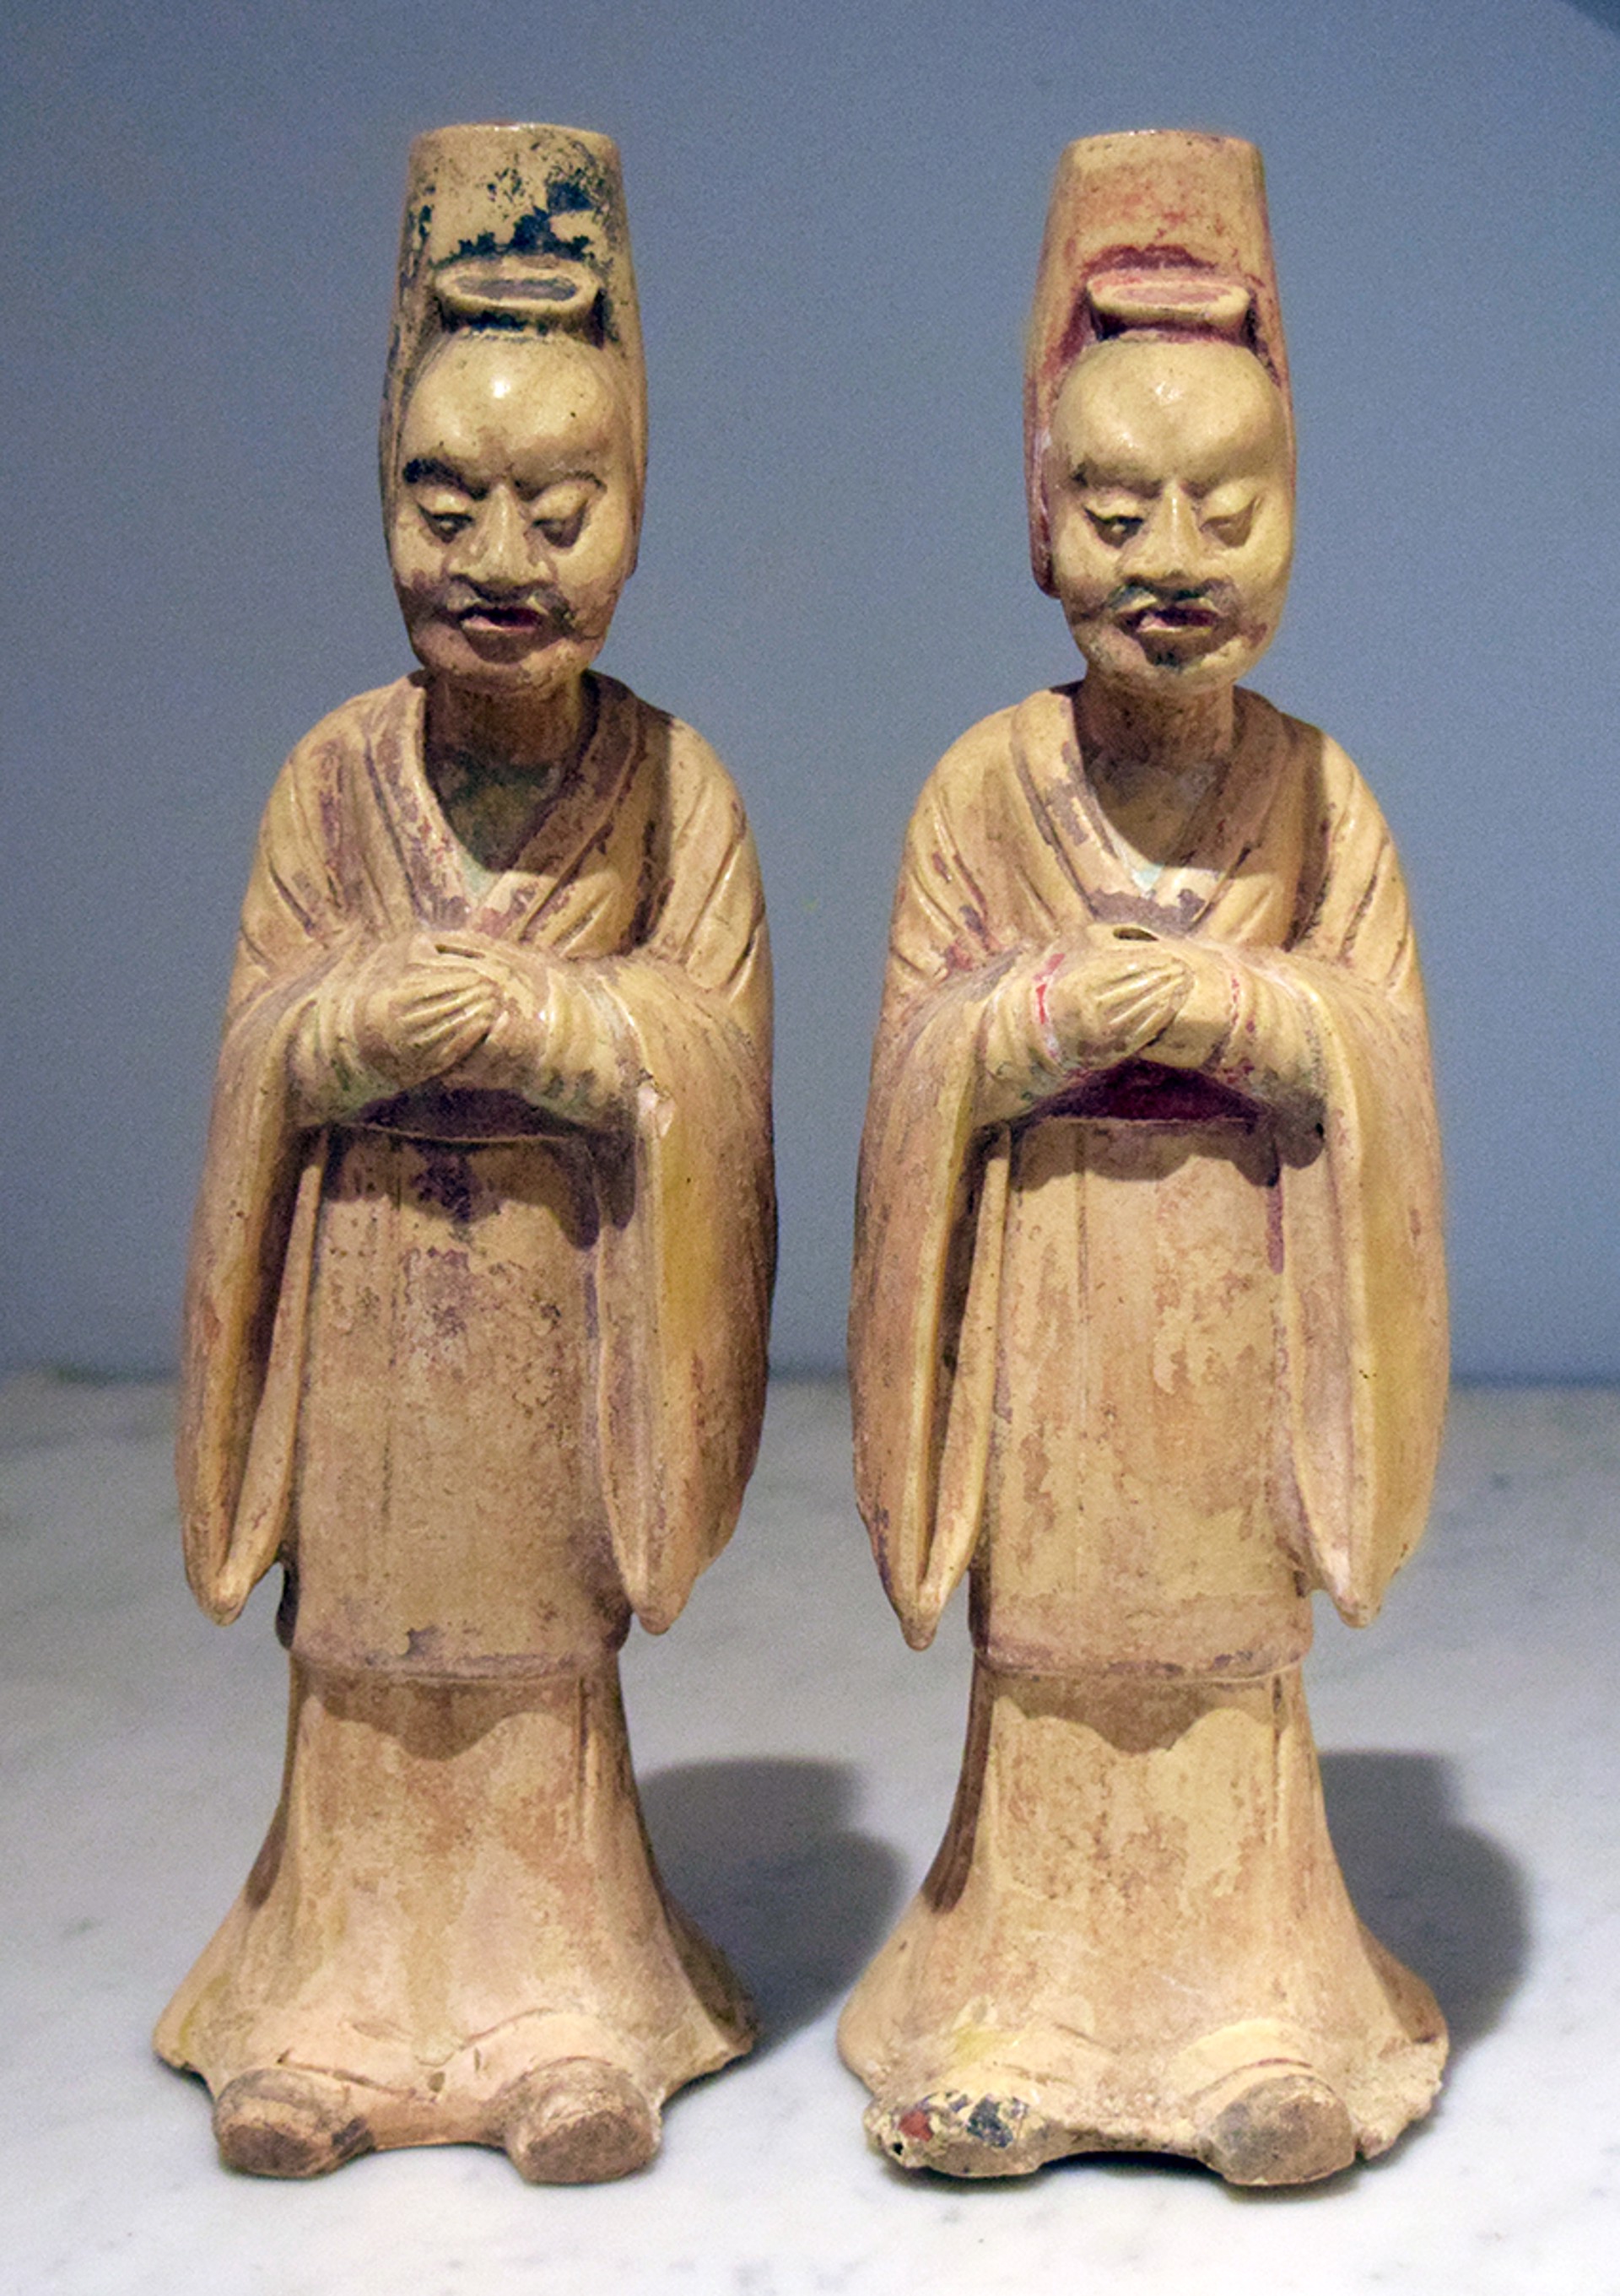 PAIR OF STRAW-GLAZED POTTERY FIGURES OF STANDING OFFICIALS